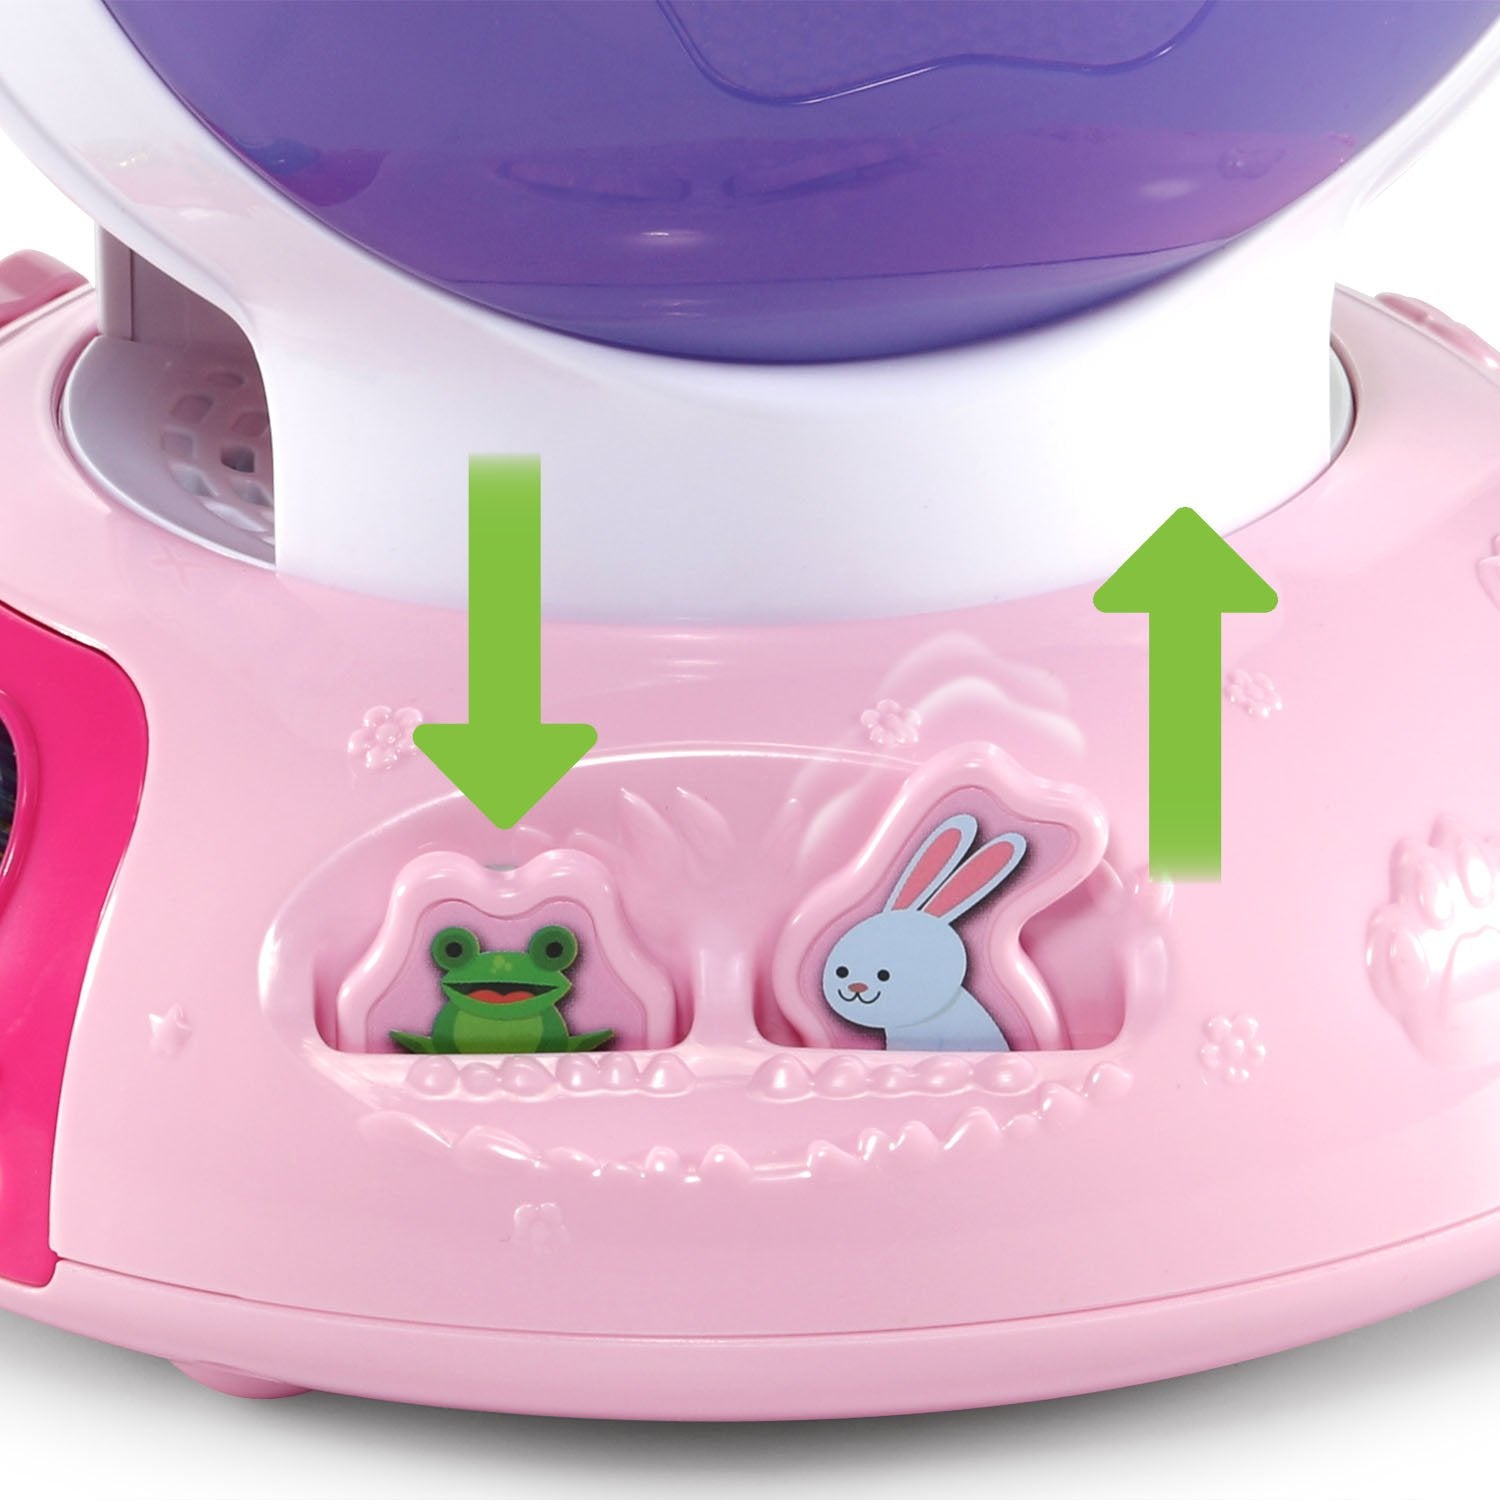 LeapFrog Spin and Sing Alphabet Zoo Amazon Exclusive, Pink